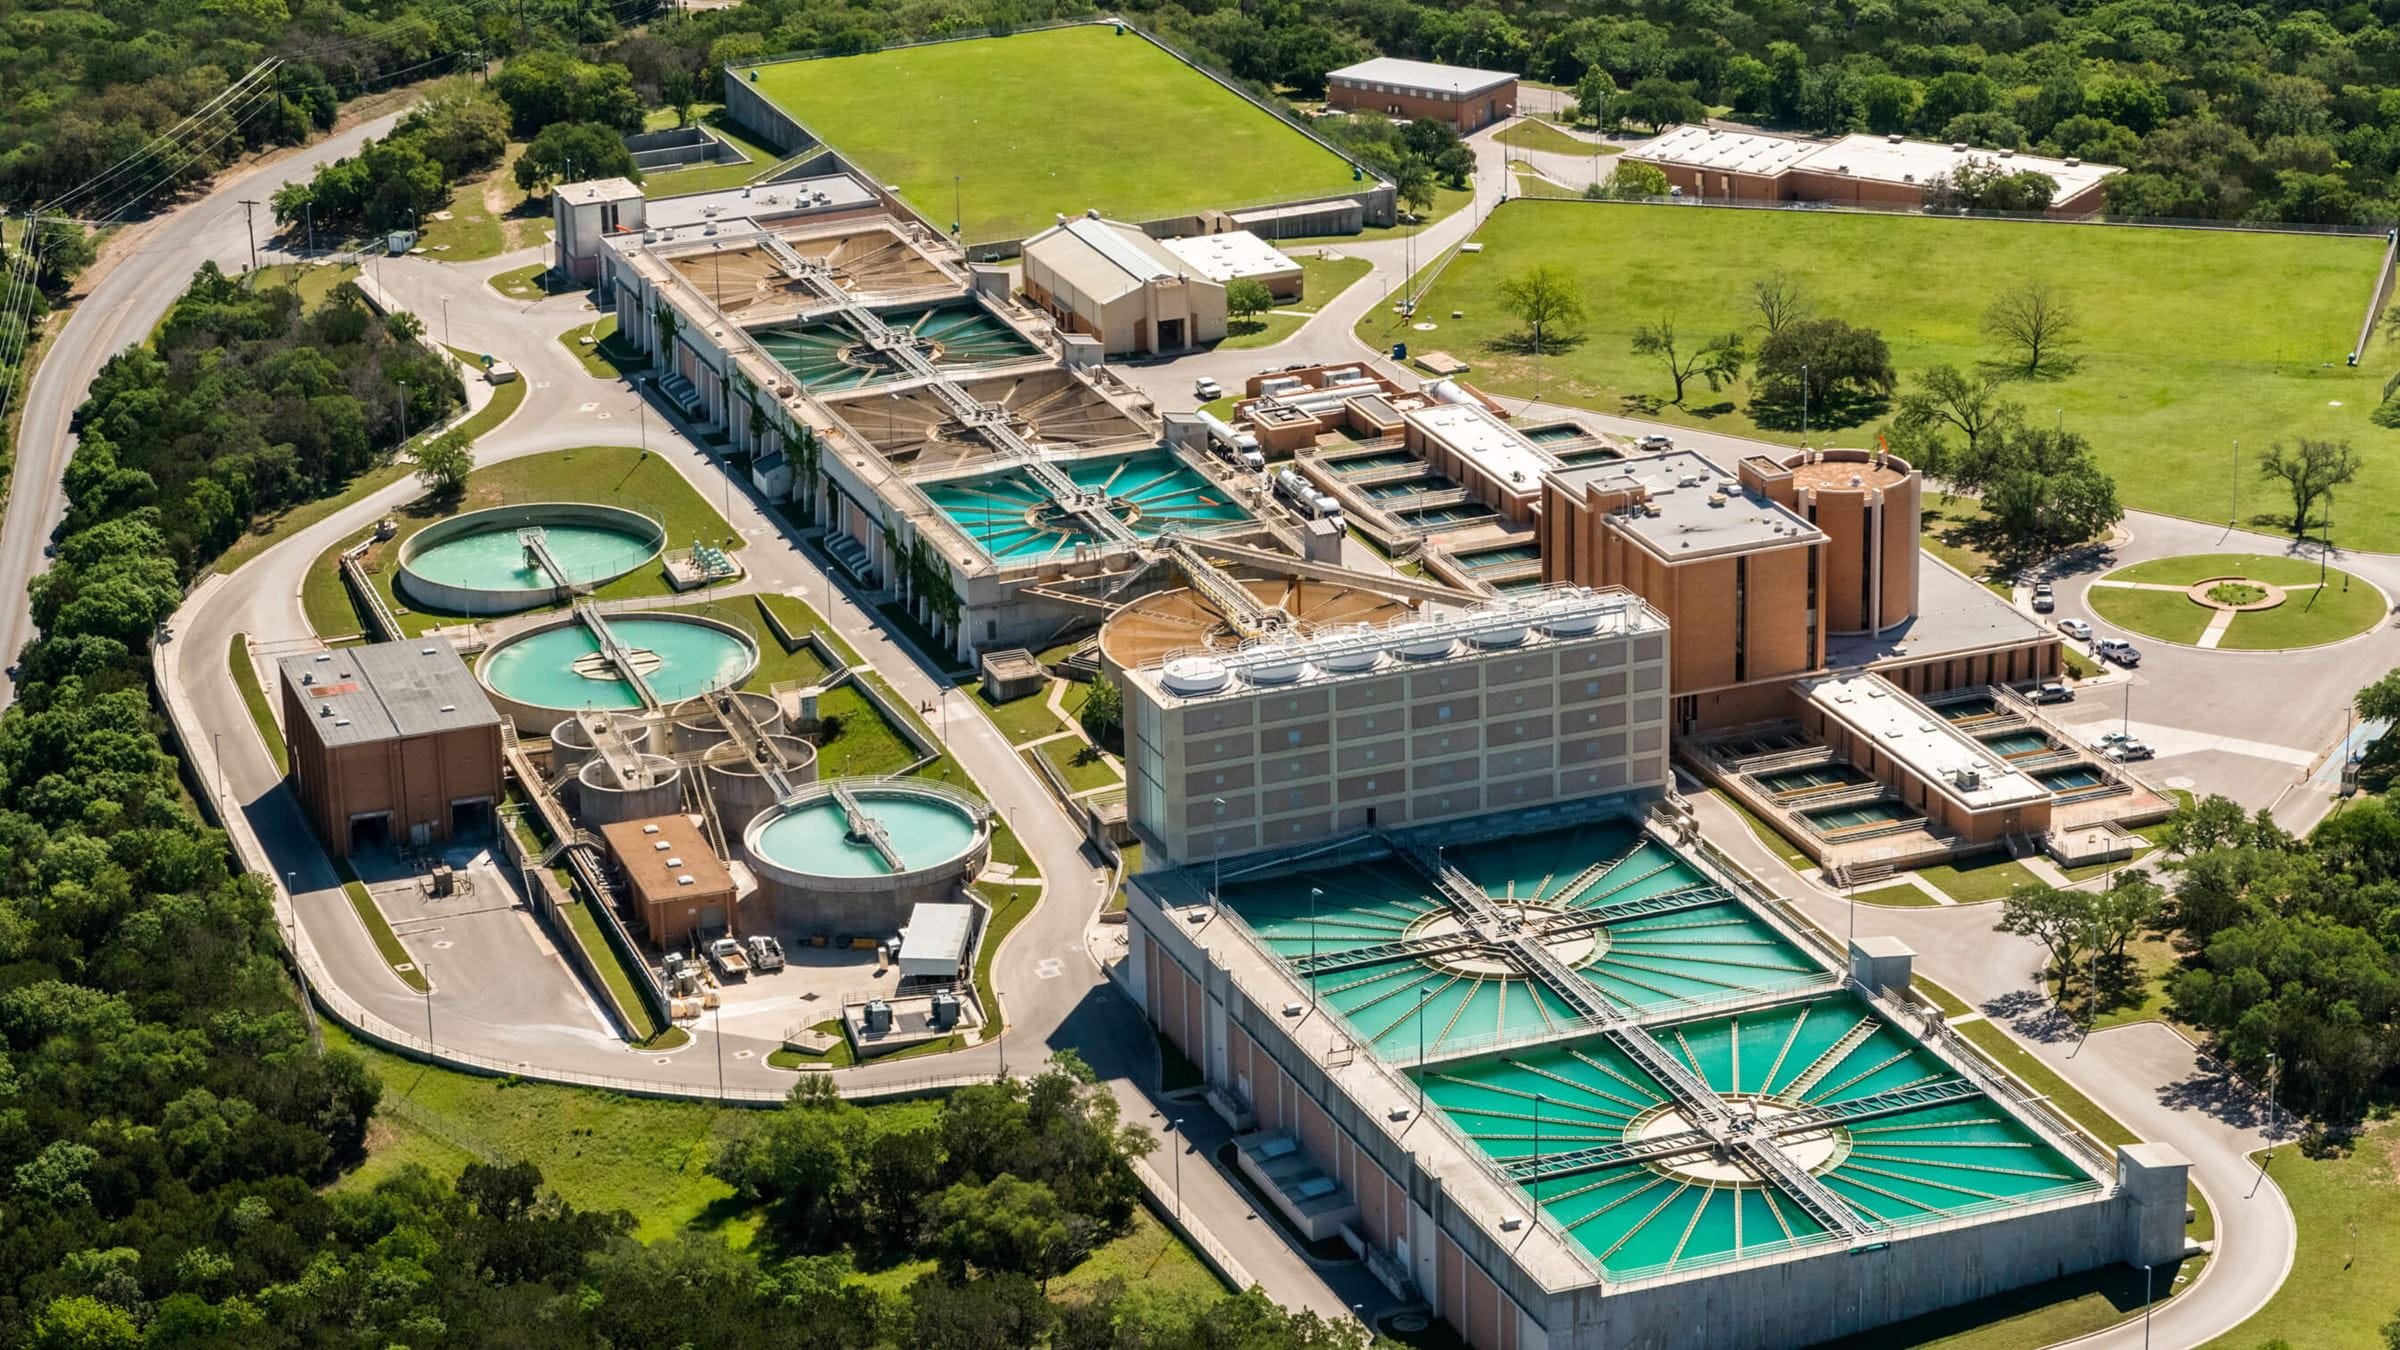 Birdseye view of waste water treatment plant and surrounds